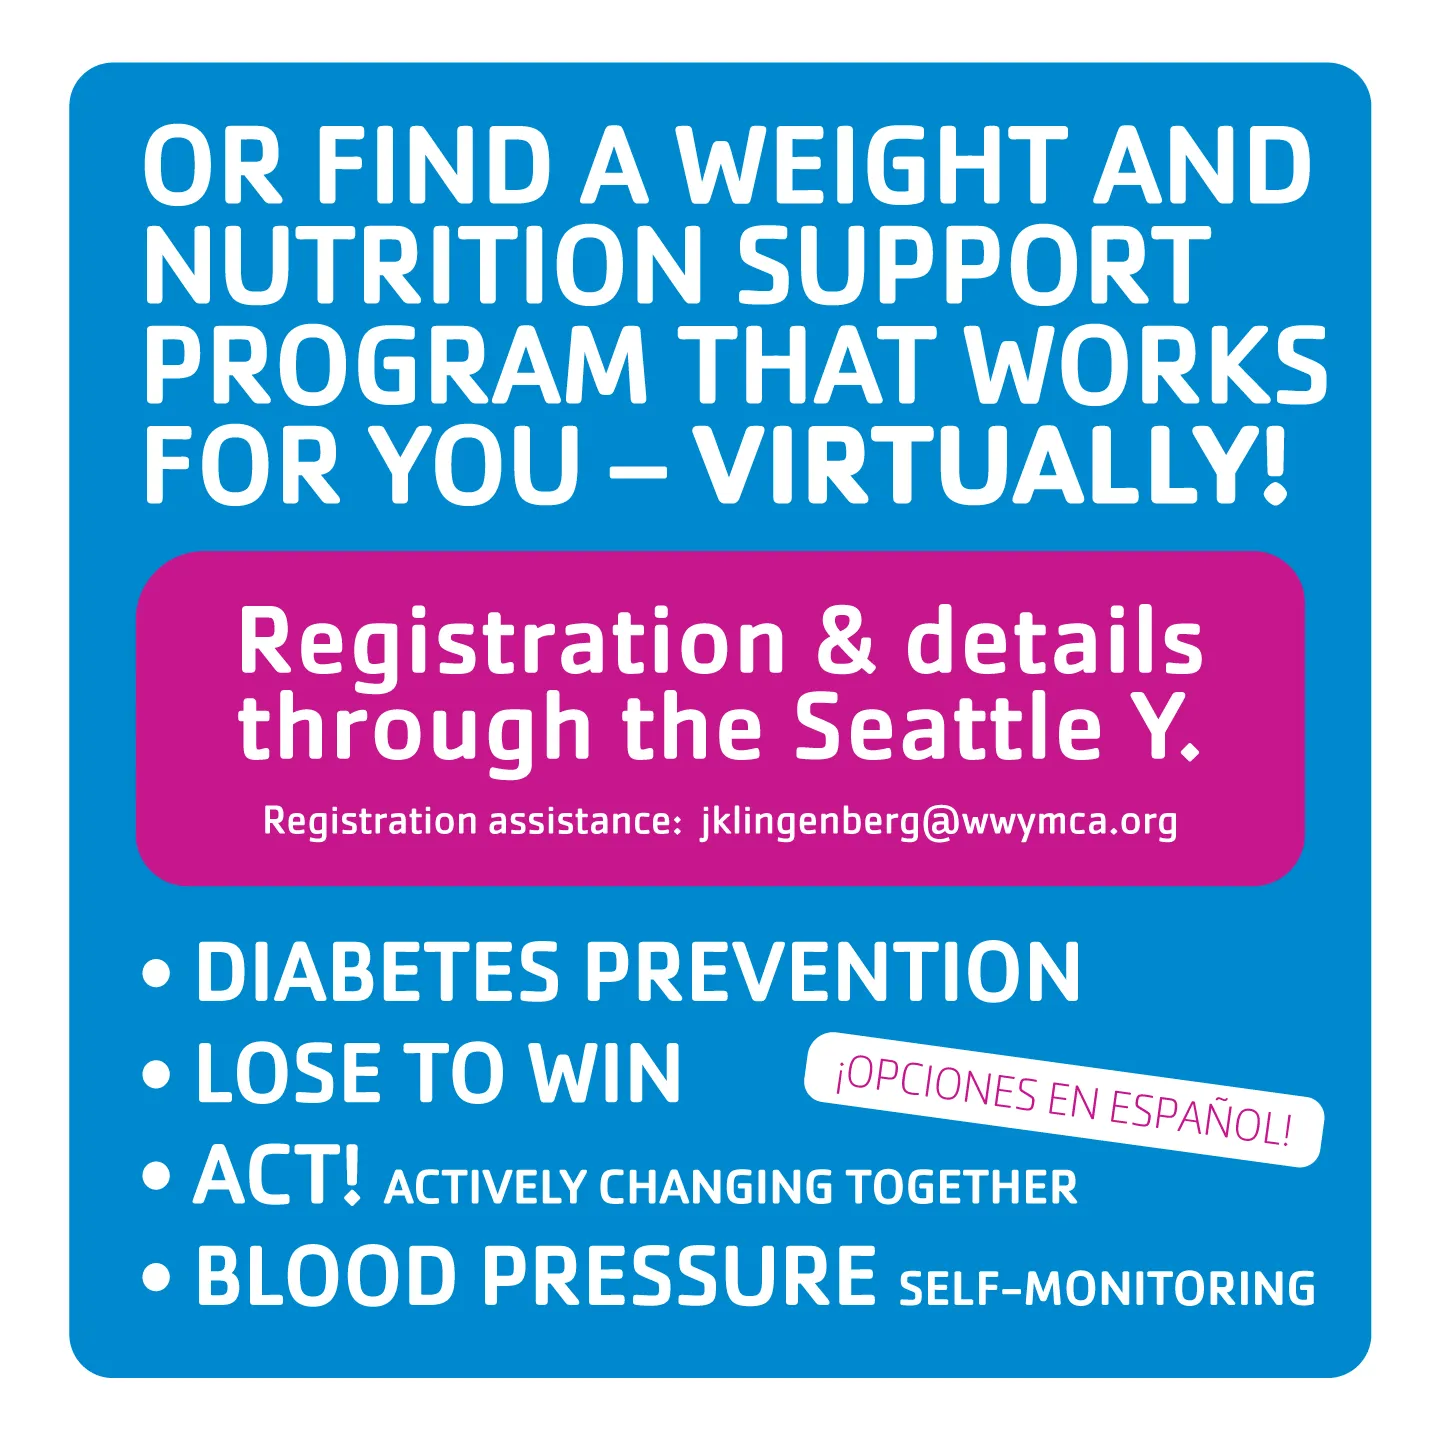 Or try a different virtual weight and nutrition programs through the Seattle Y.